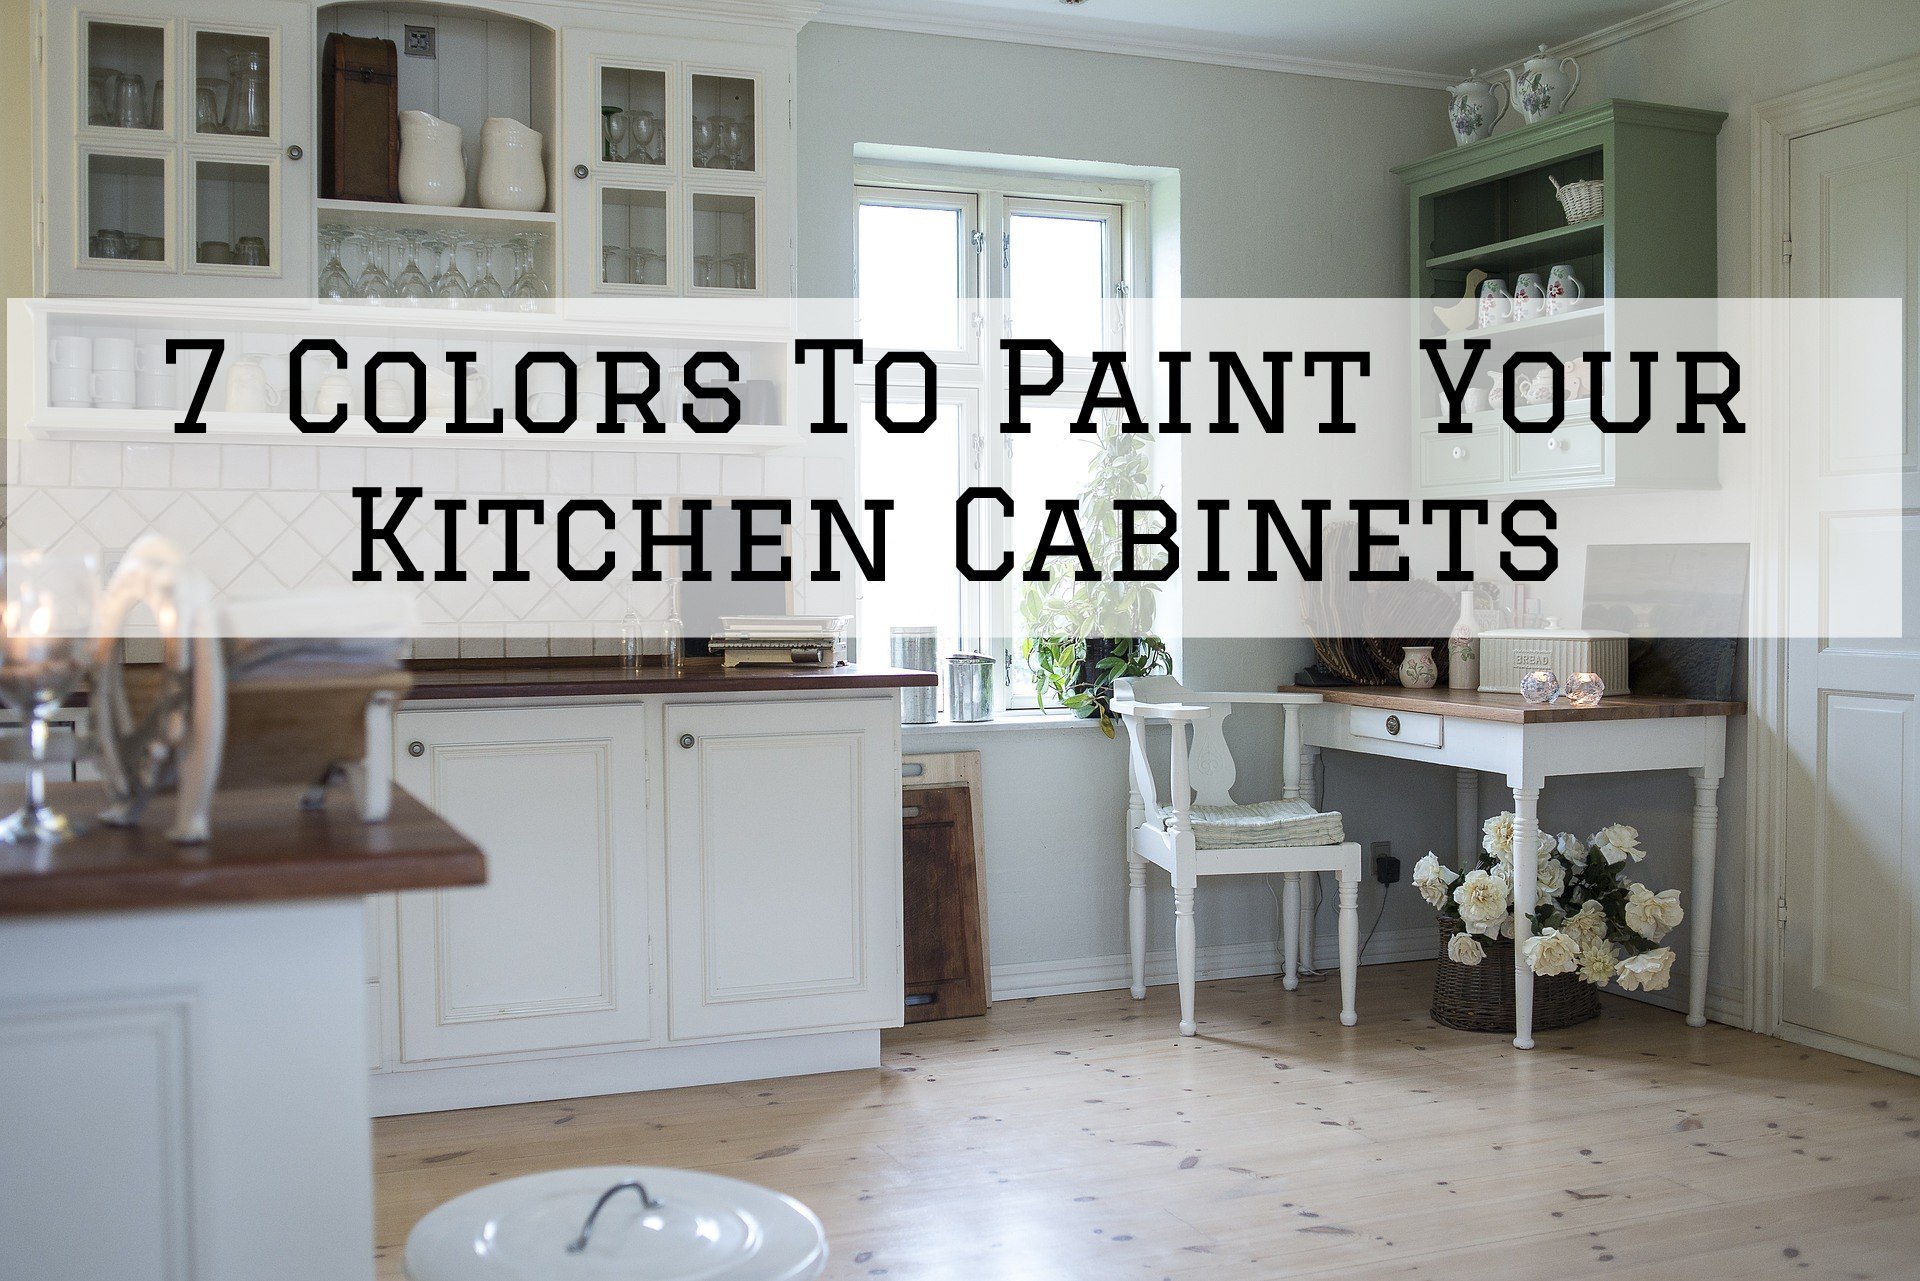 7 Colors to Paint Your Kitchen Cabinets in Omaha, NE